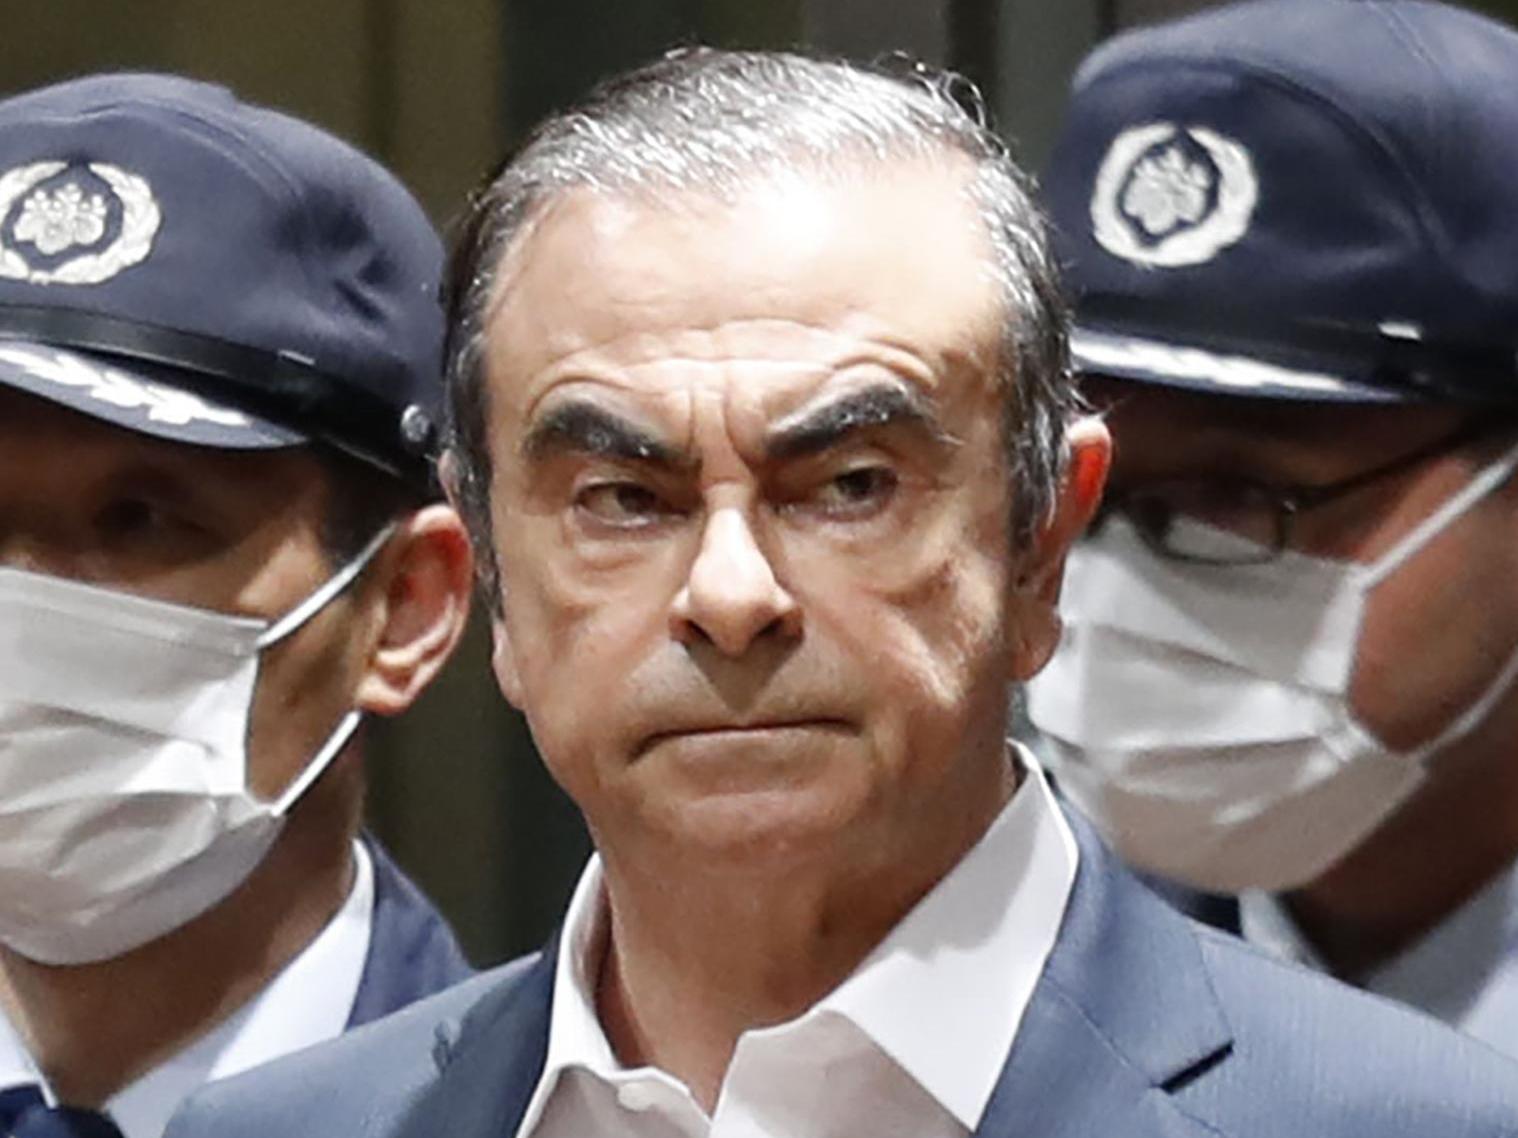 From corporate kingpin to international fugitive: Former Nissan boss Carlos Ghosn